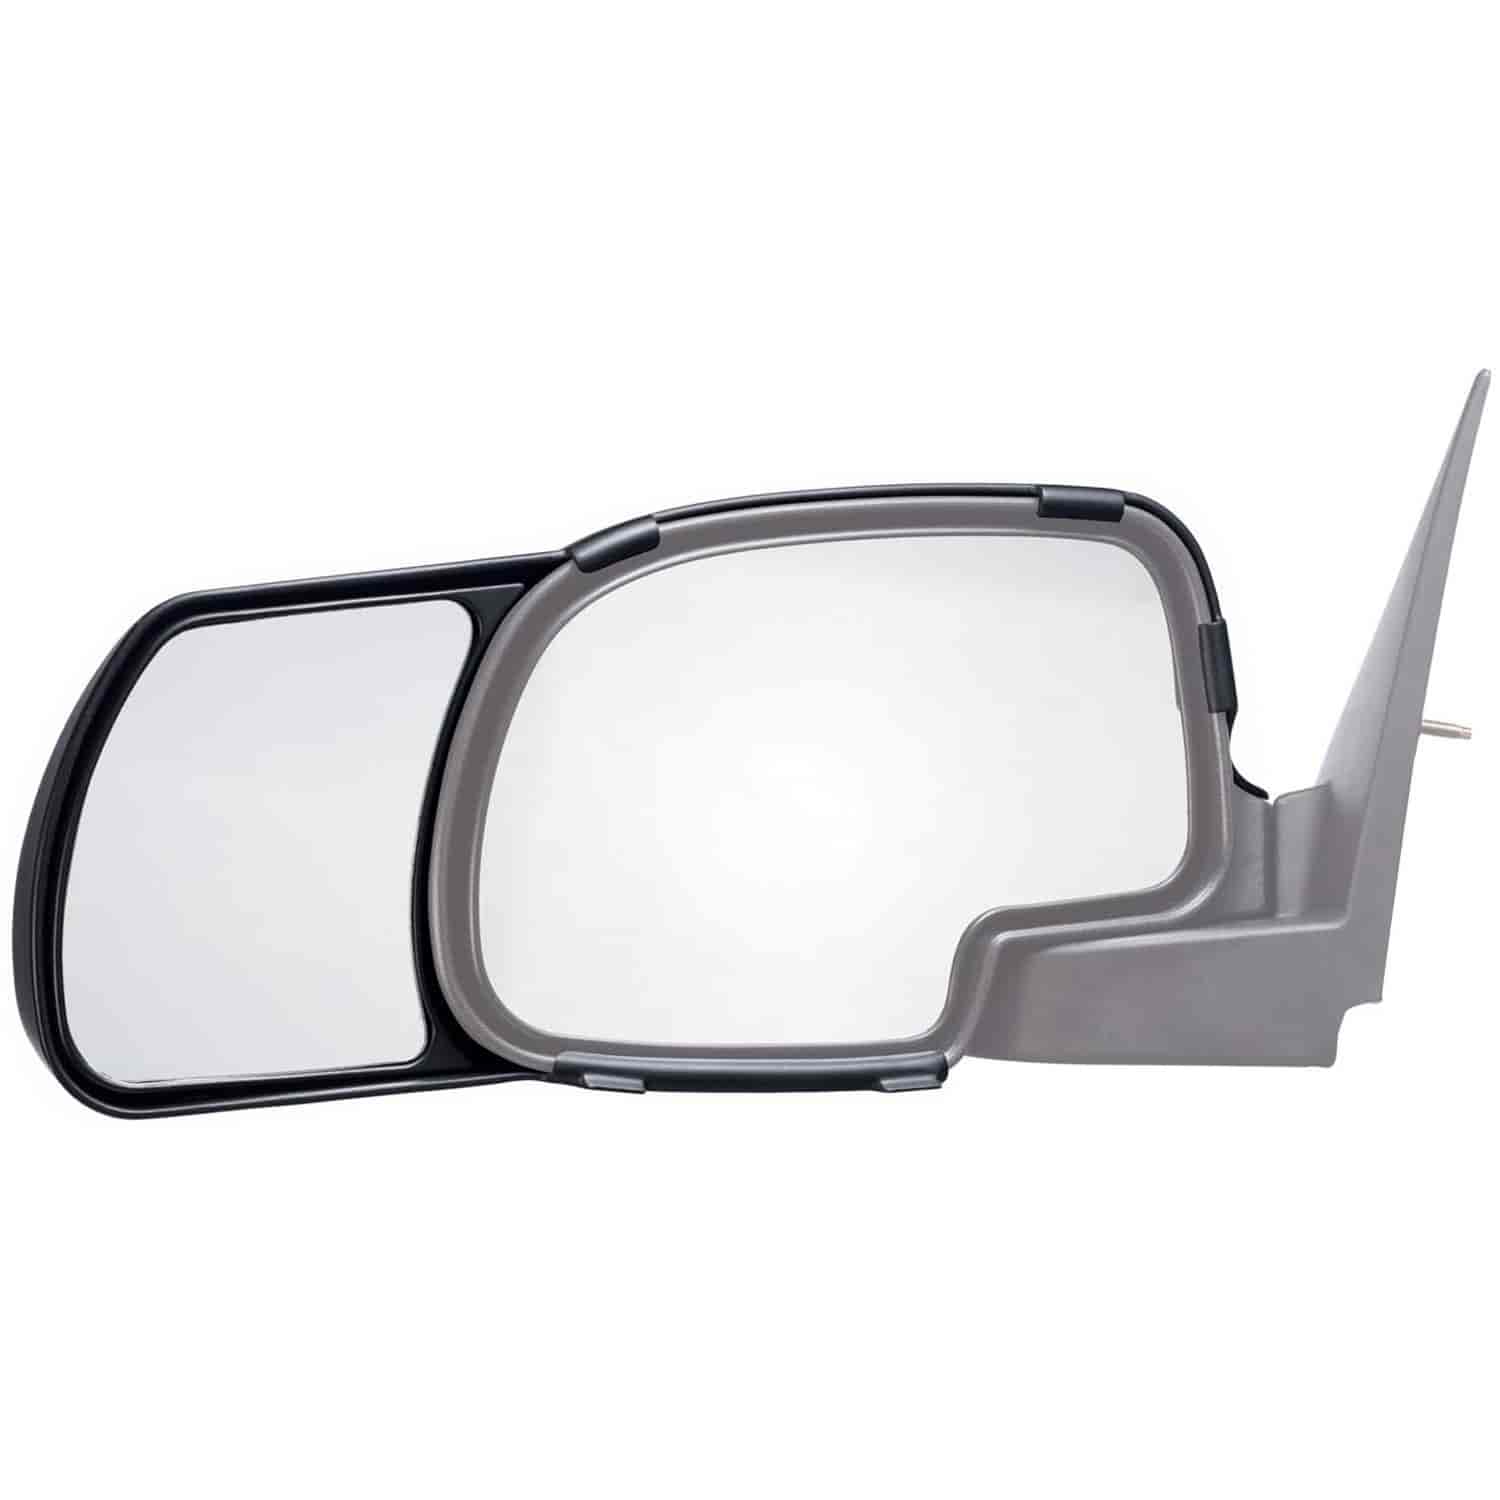 Snap-On Towing Mirrors Fits 1999 to 2006 Chevy Silverado & GMC Sierra